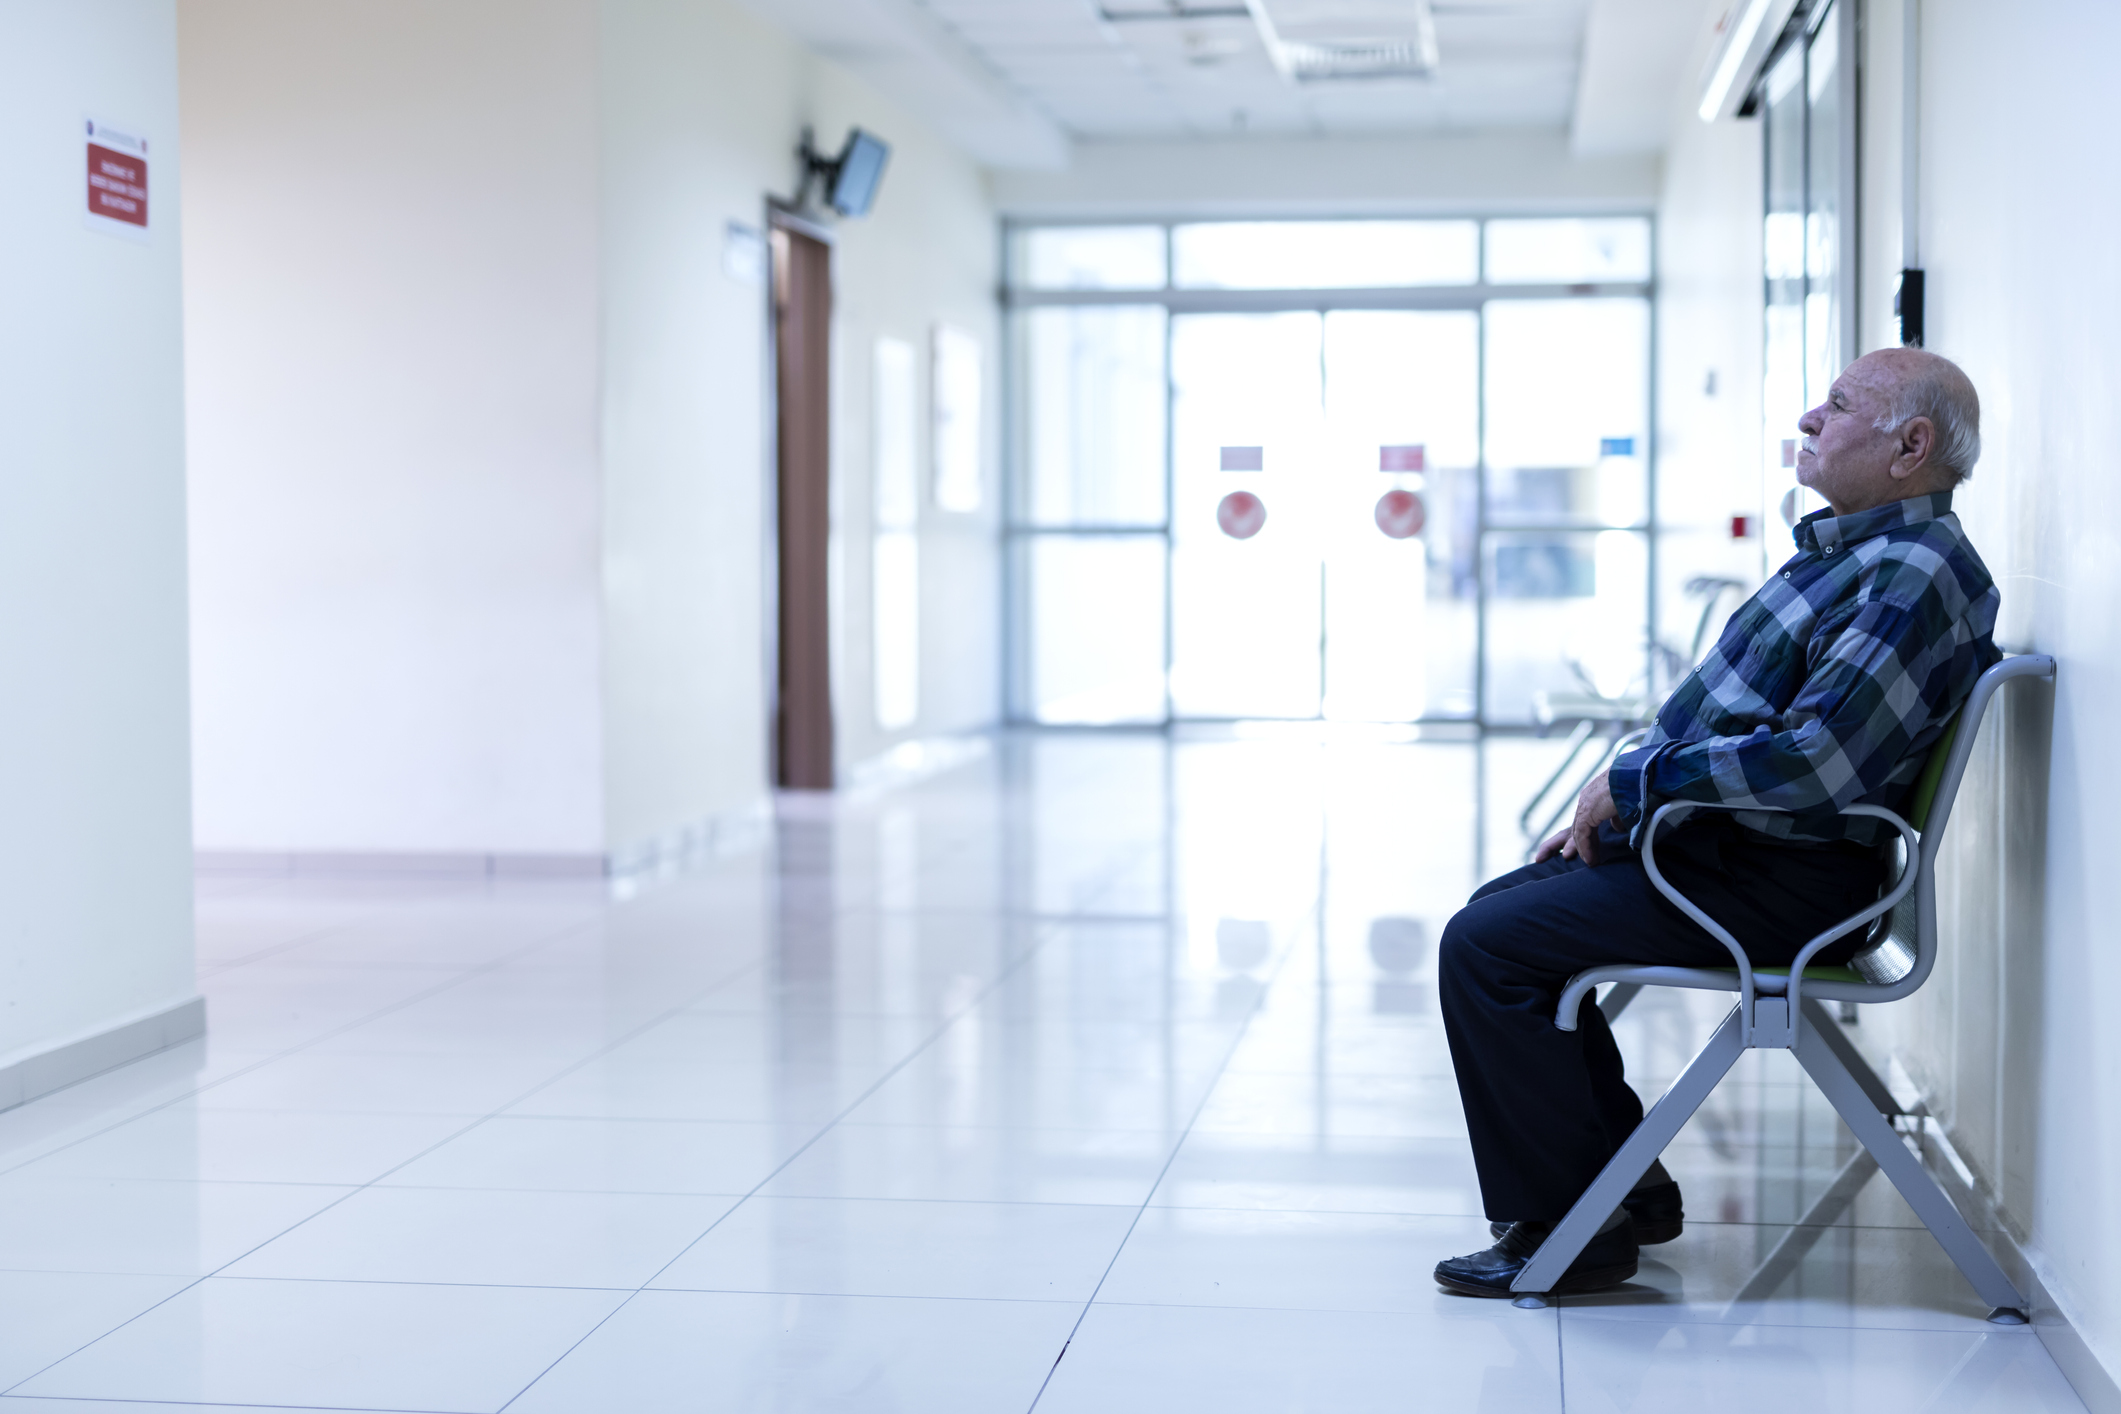 stock photo of older man in hospital waiting area